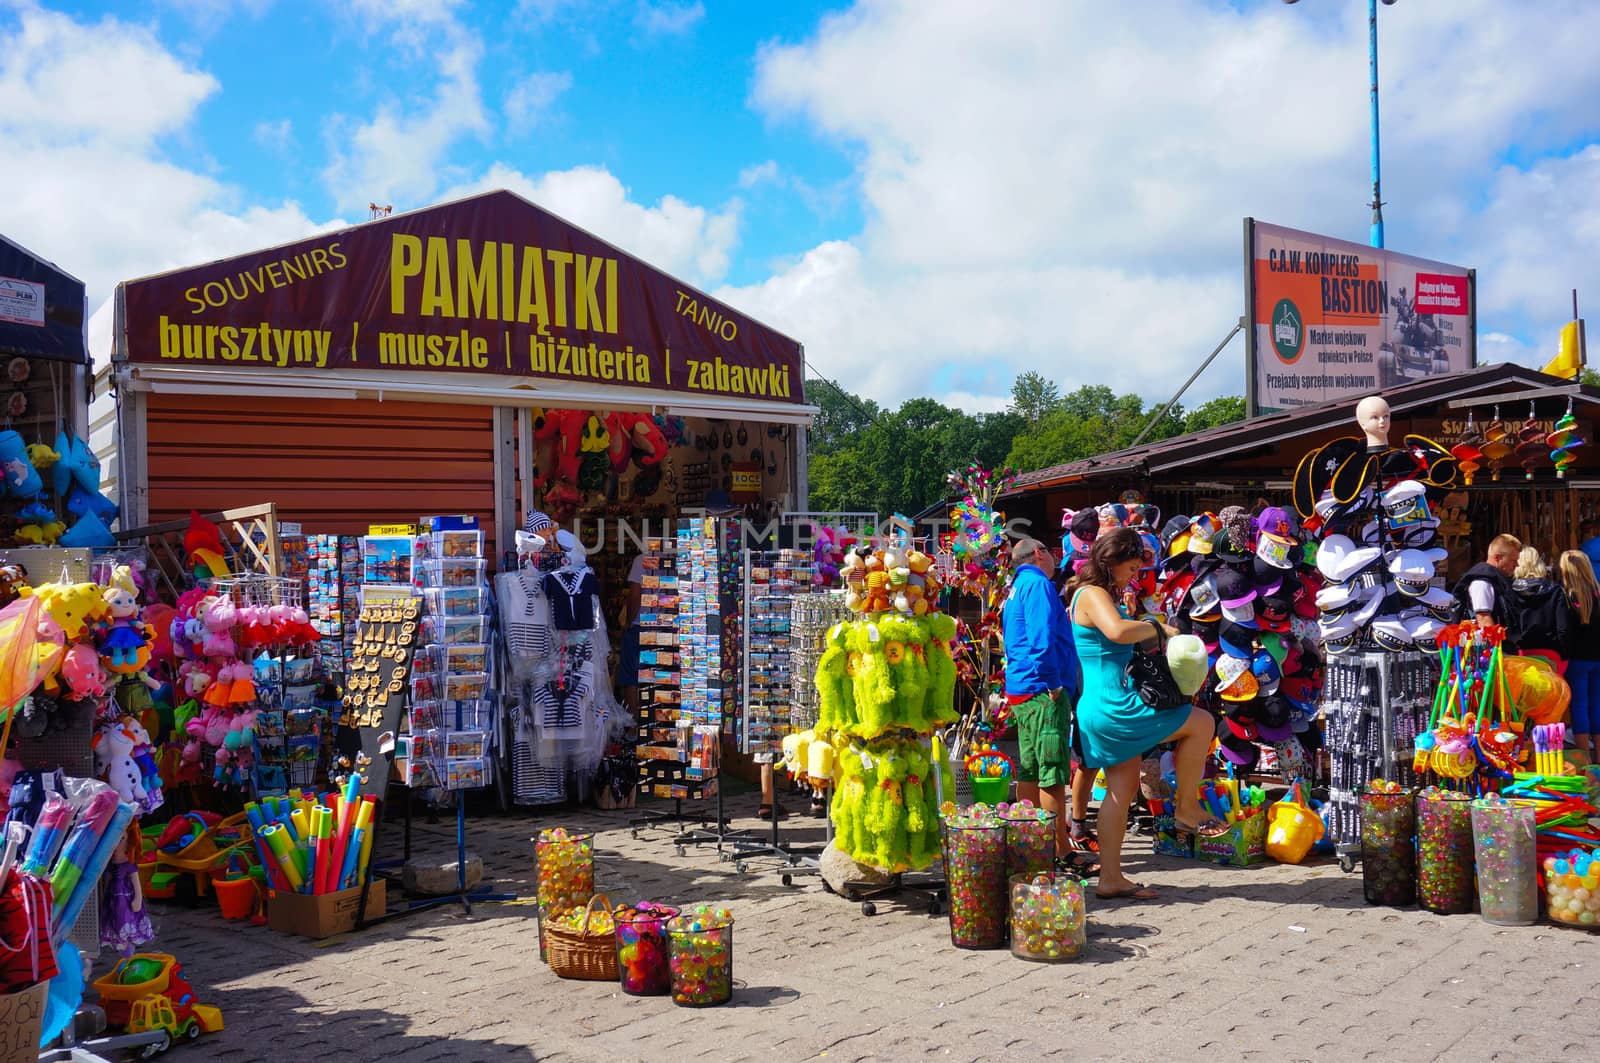 SIANOZETY, POLAND - JULY 23, 2015: Postcards and toys for sale at a gift shop